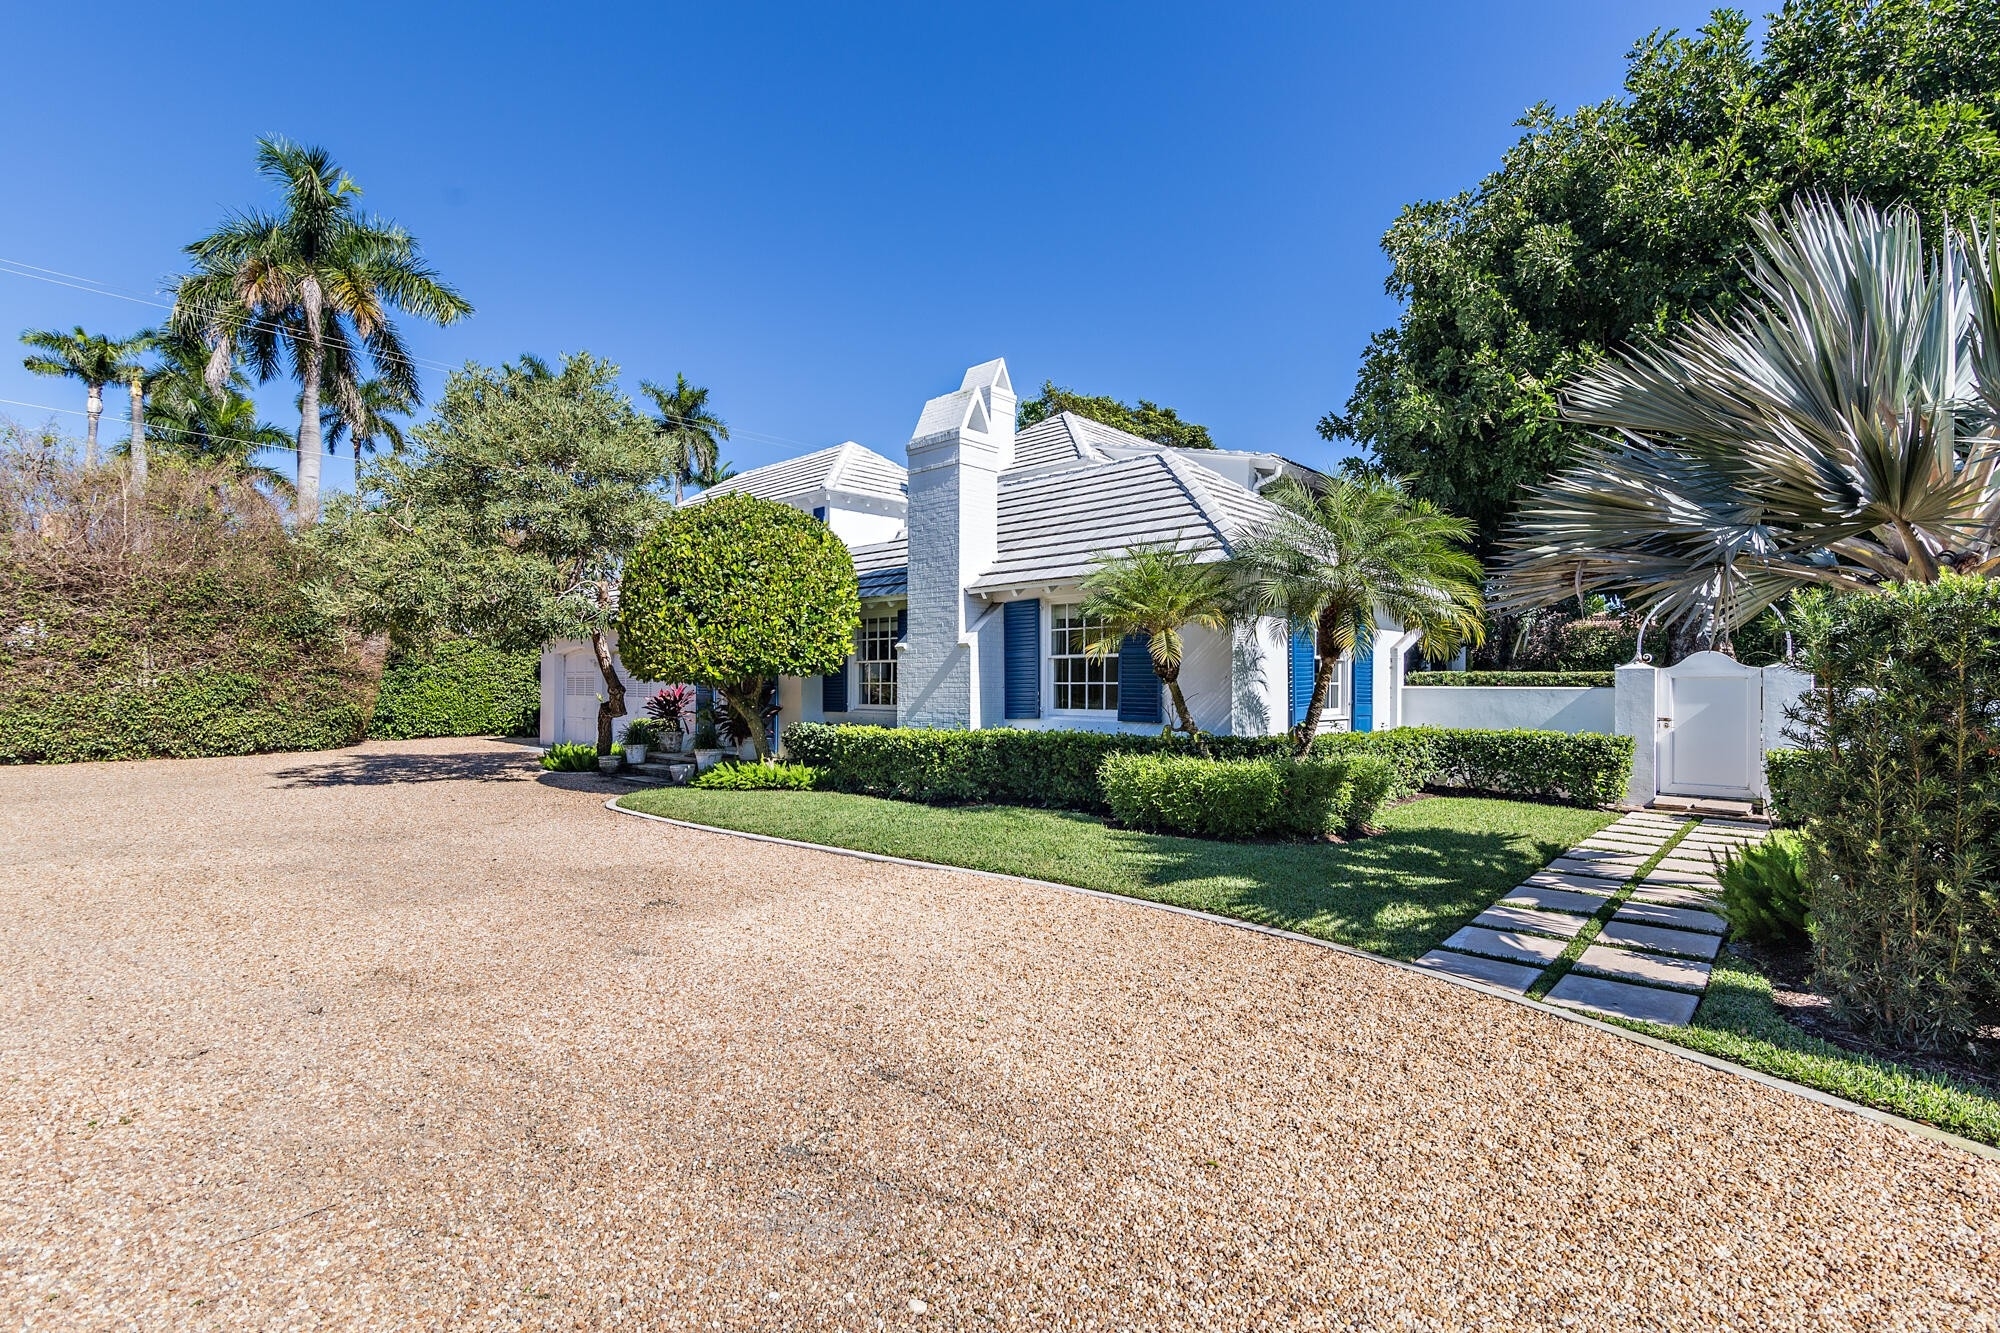 Single Family Home at Palm Beach